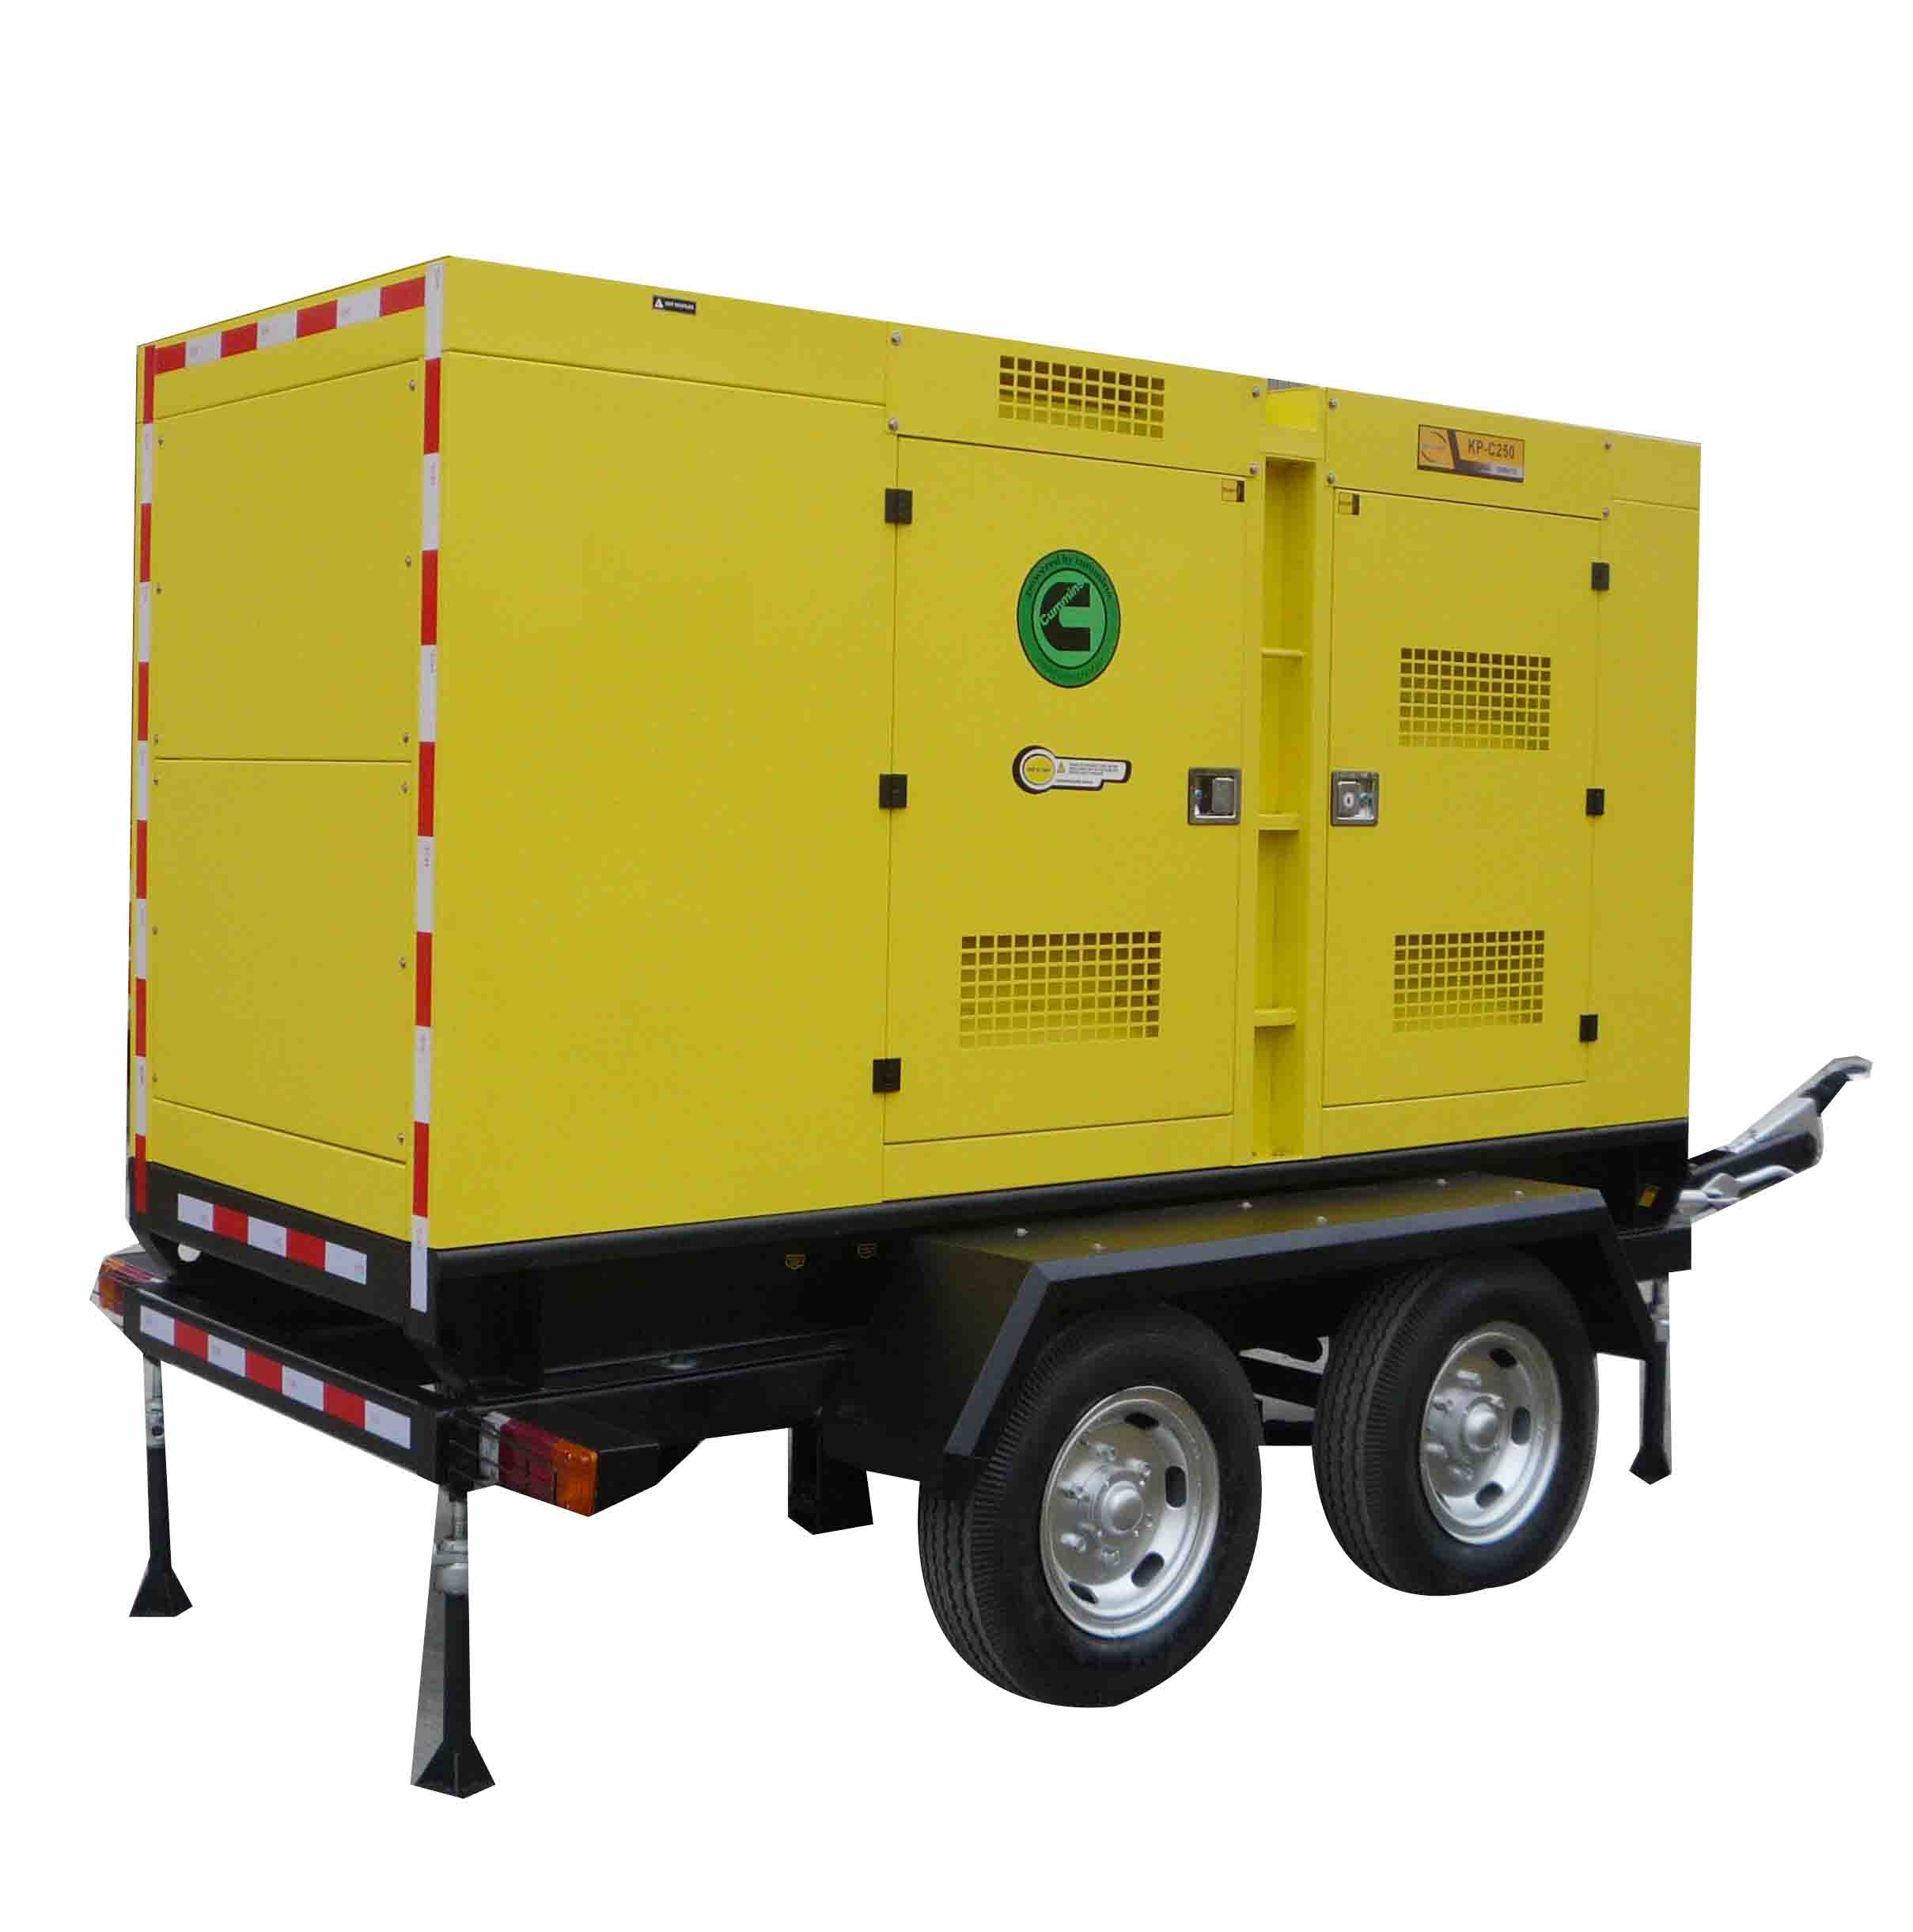 Notes for installation of generator sets